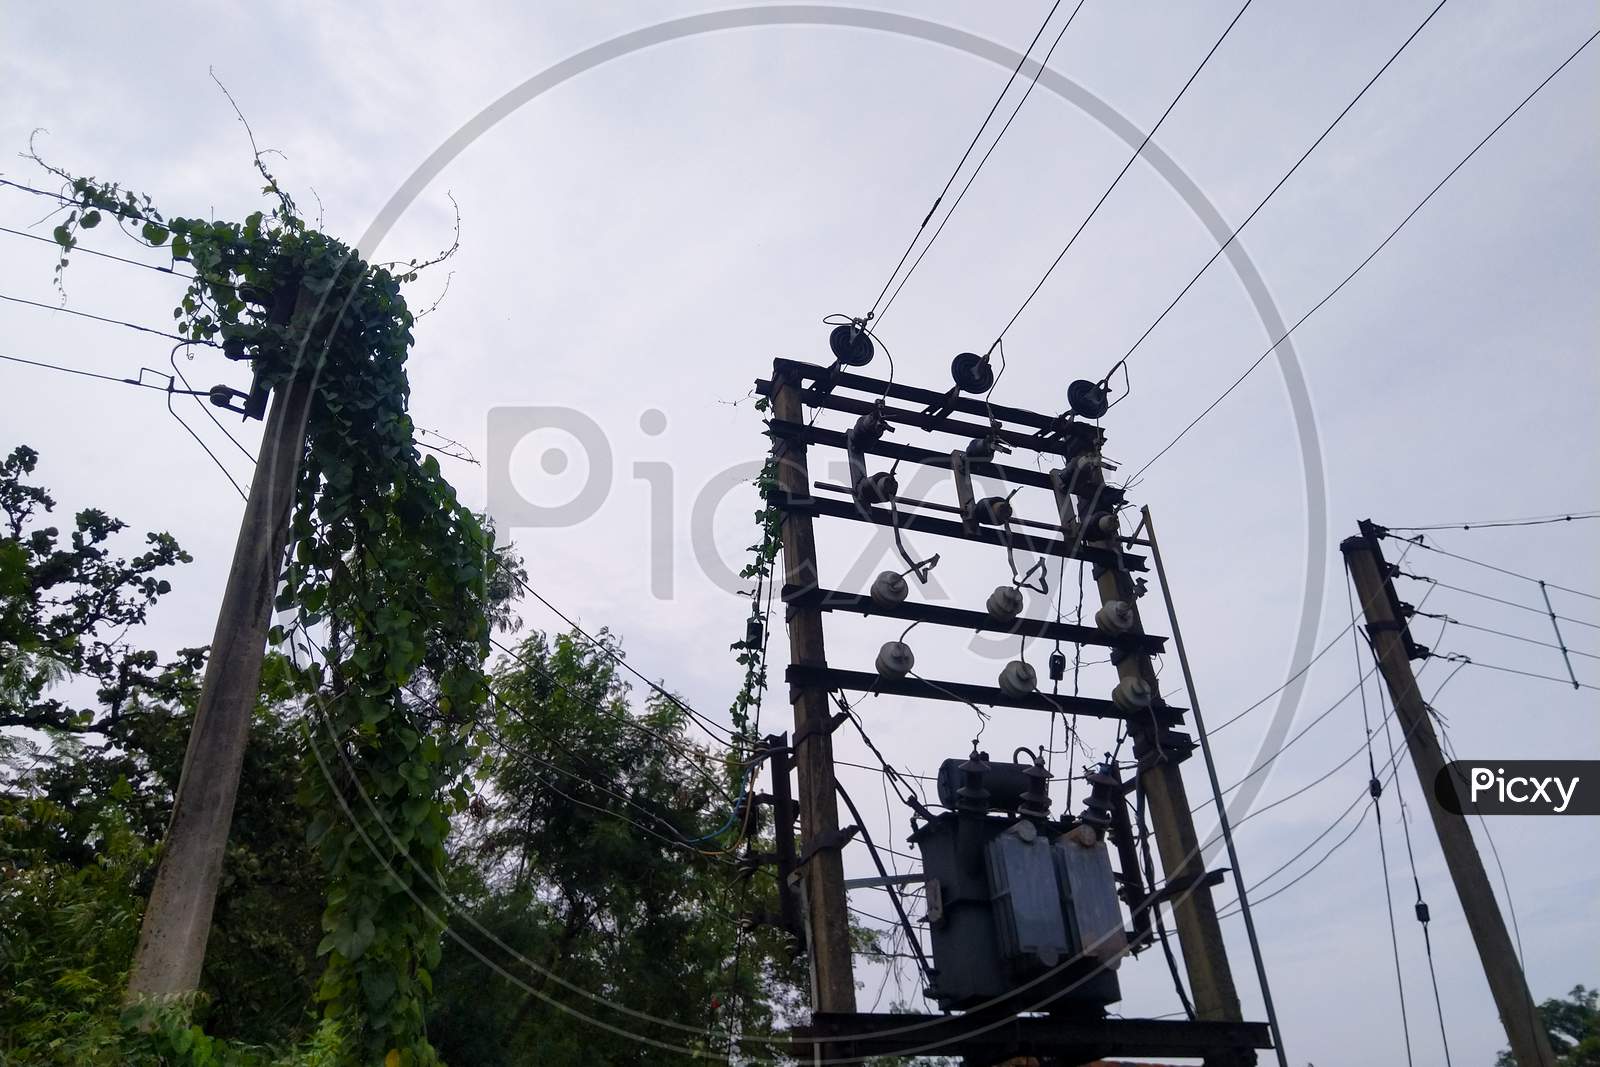 Electric Transformer & Pole On A Cloudy Day Selective Focus